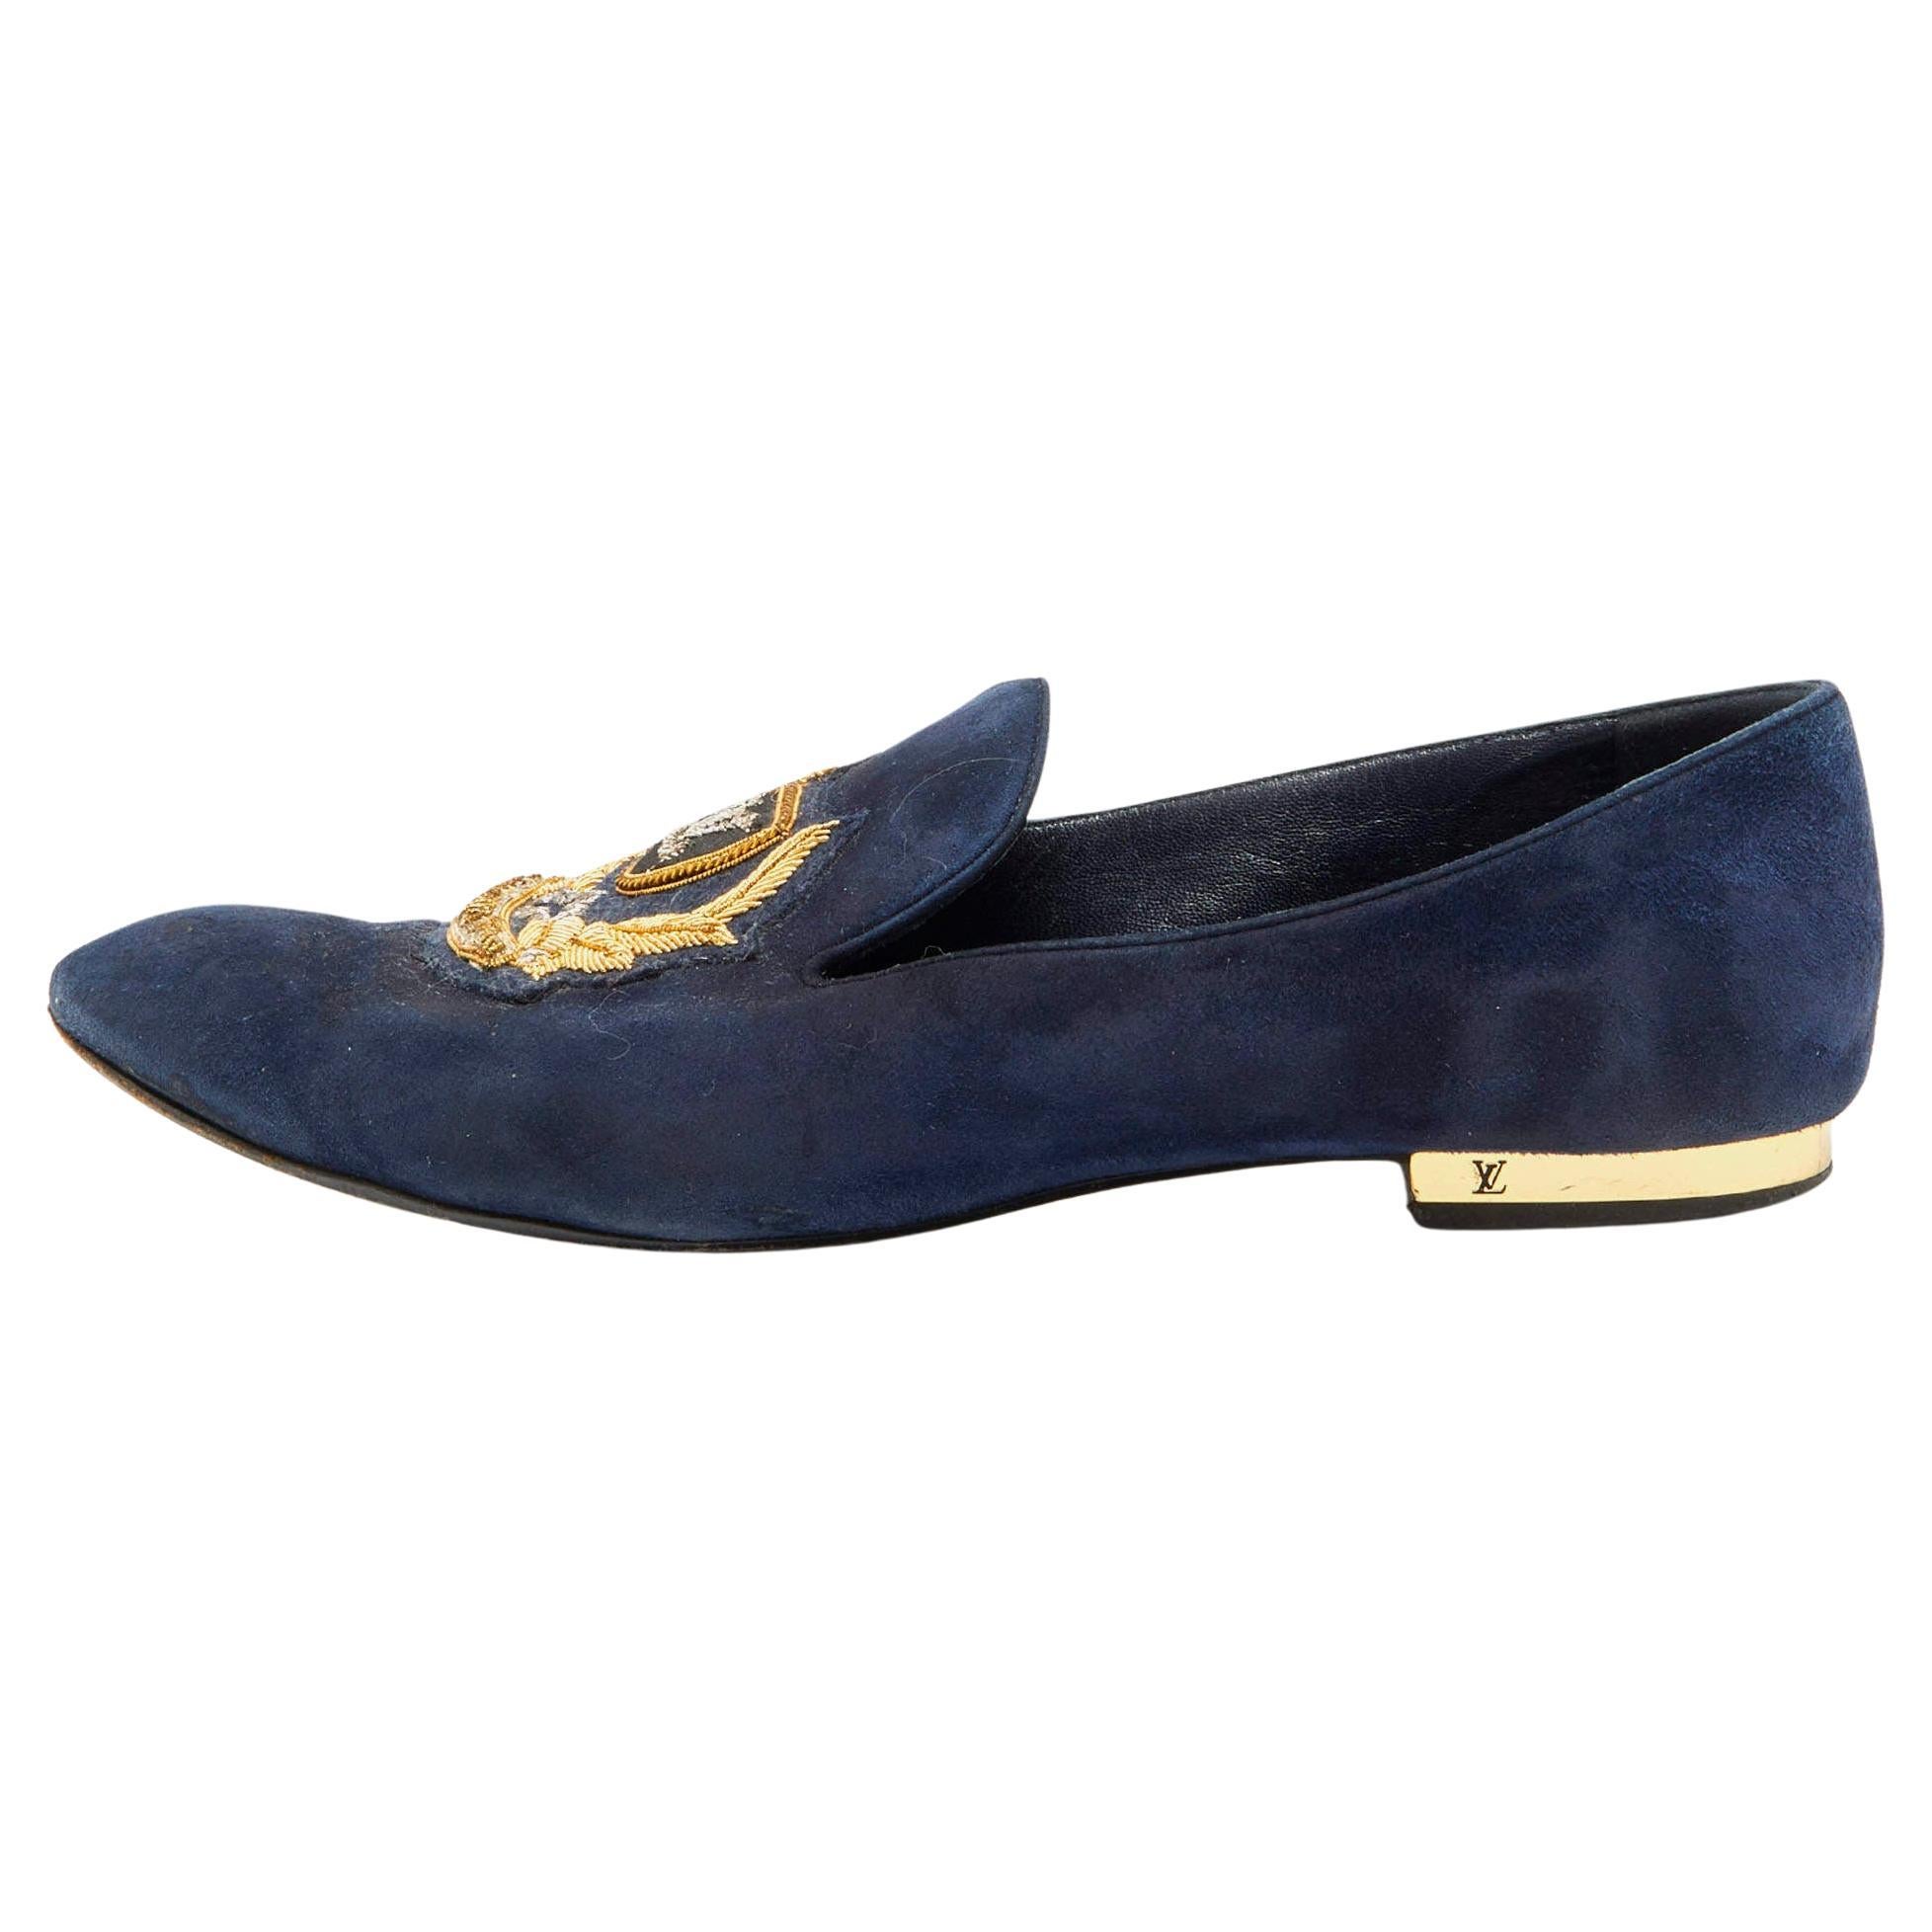 Louis Vuitton Navy Blue Suede Embroidered Smoking Slippers Size 38 For Sale